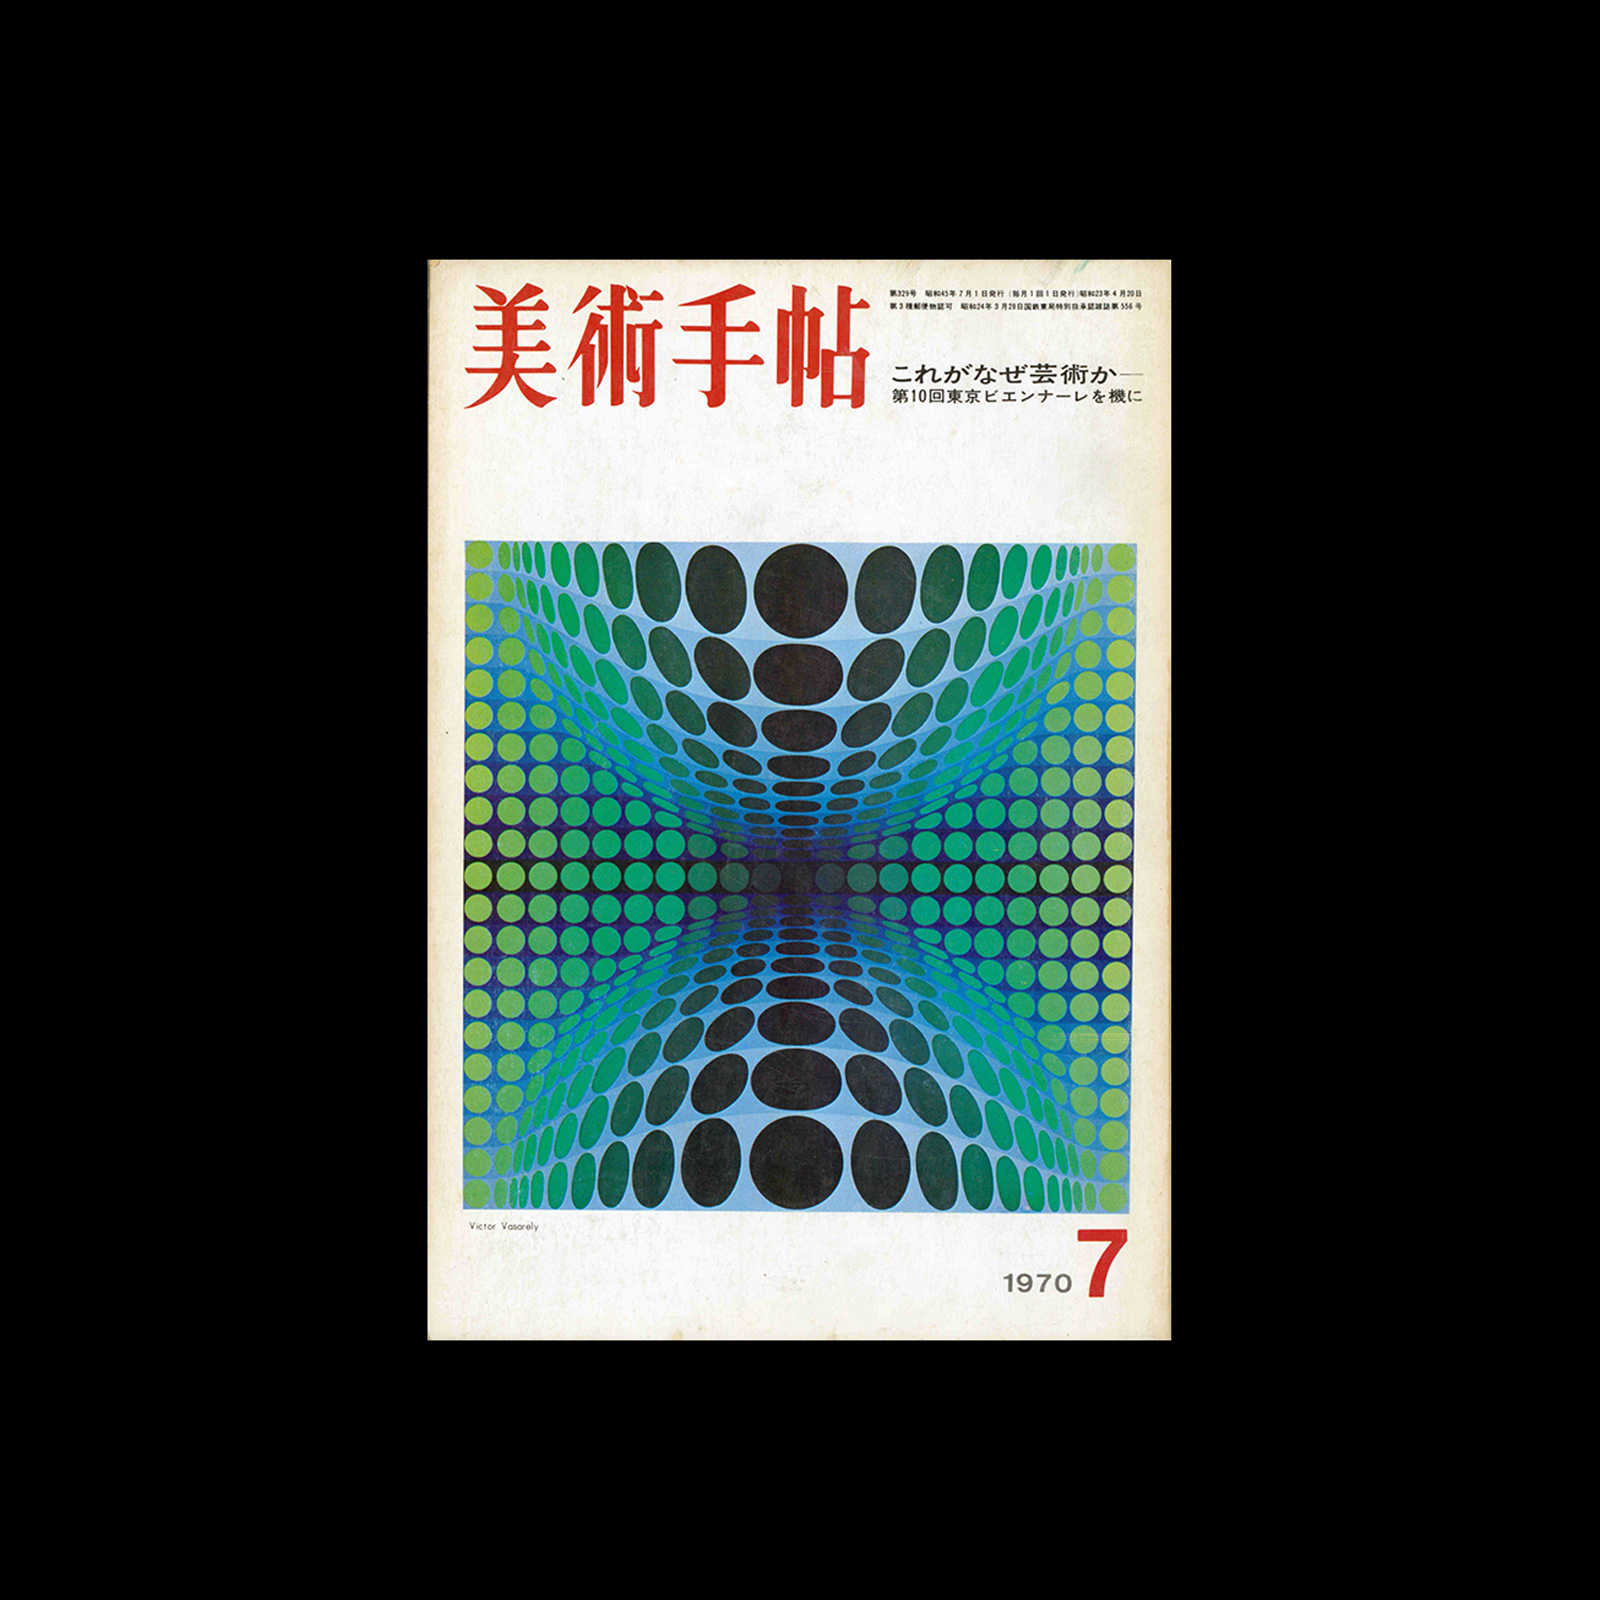 Art Notebook, July 1970 No.329. Cover design by Victor Vasarely.